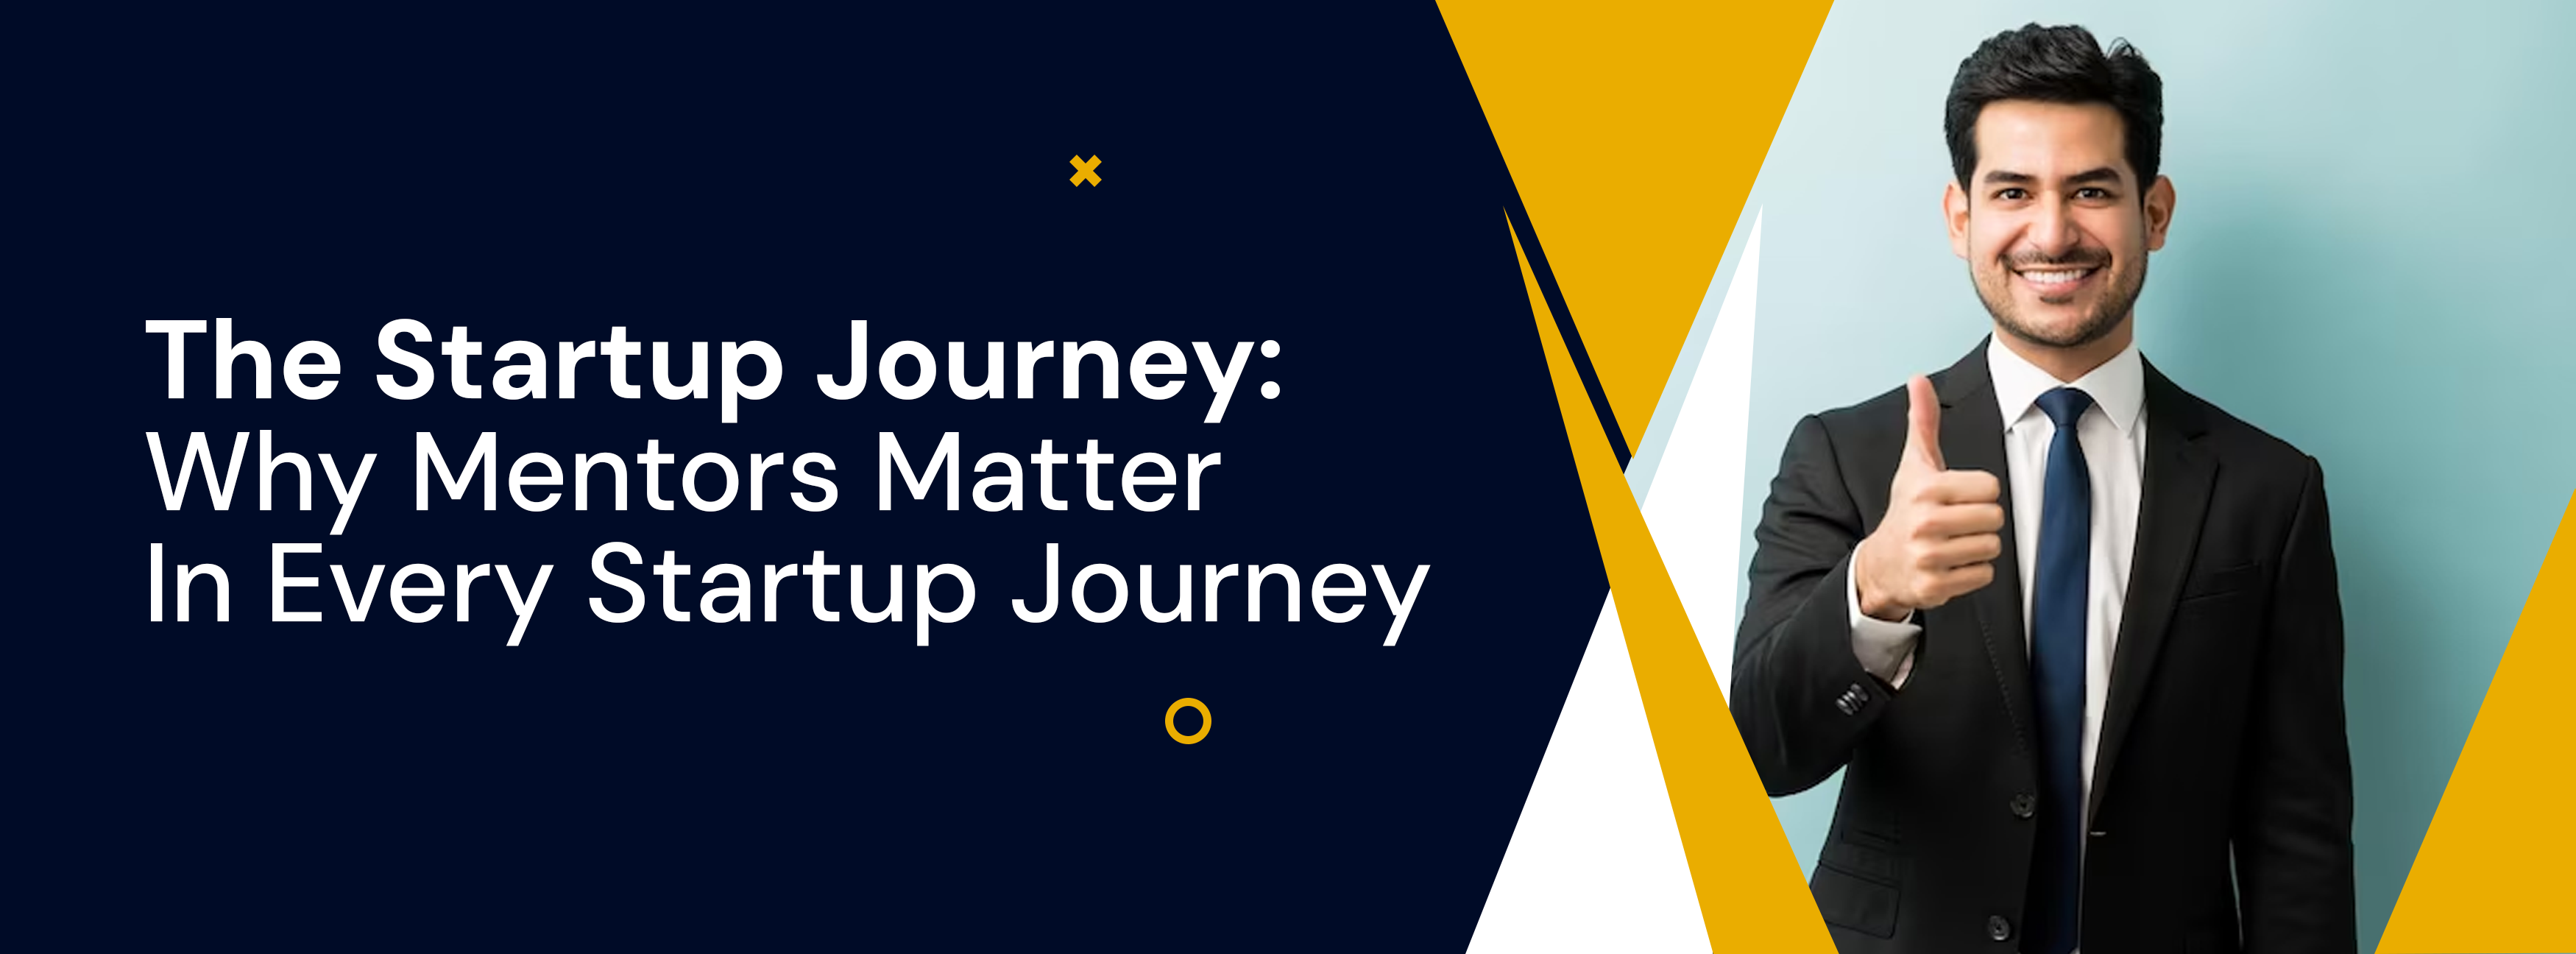 The Startup Journey: Why Mentors Matter In Every Startup Journey